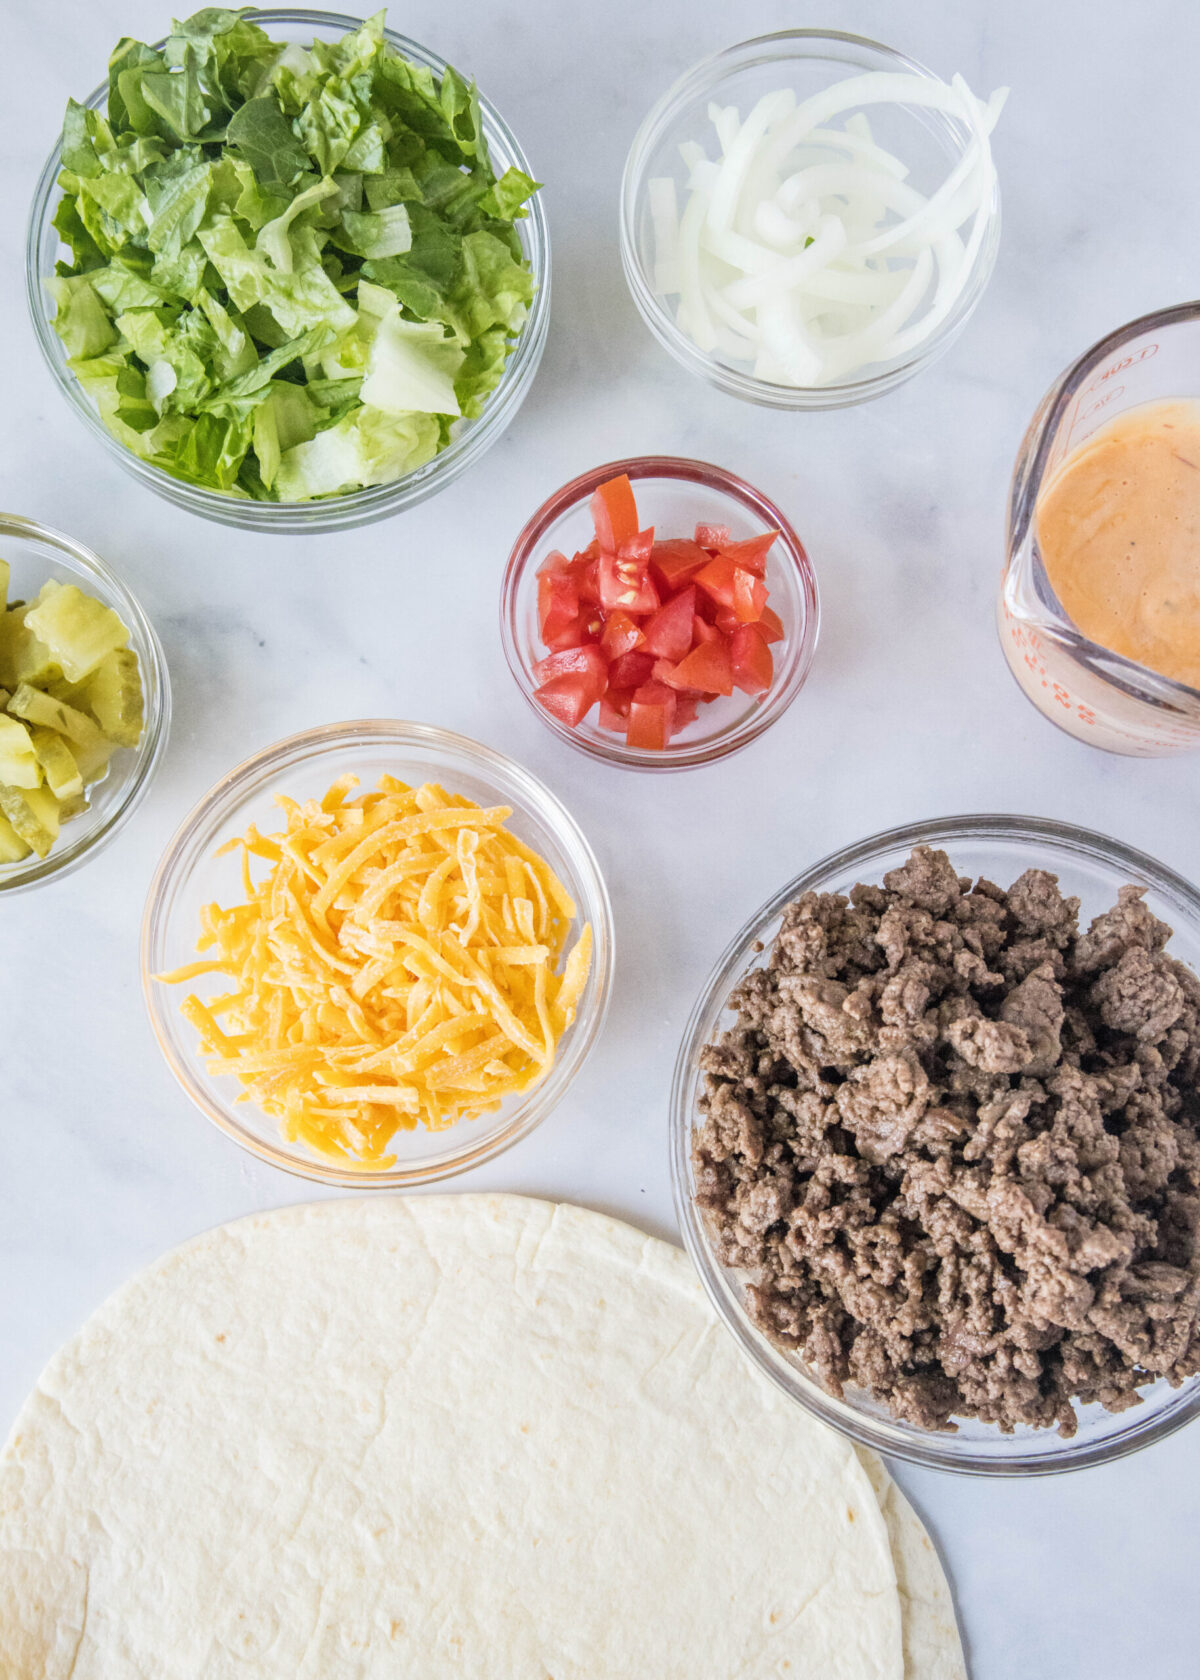 Overhead view of the ingredients needed for Big Mac wraps: a stack of tortillas, a bowl of cooked ground beef, a bowl of shredded cheese, a bowl of onions, a bowl of tomatoes, a bowl of pickles, a bowl of lettuce, and a jar of sauce